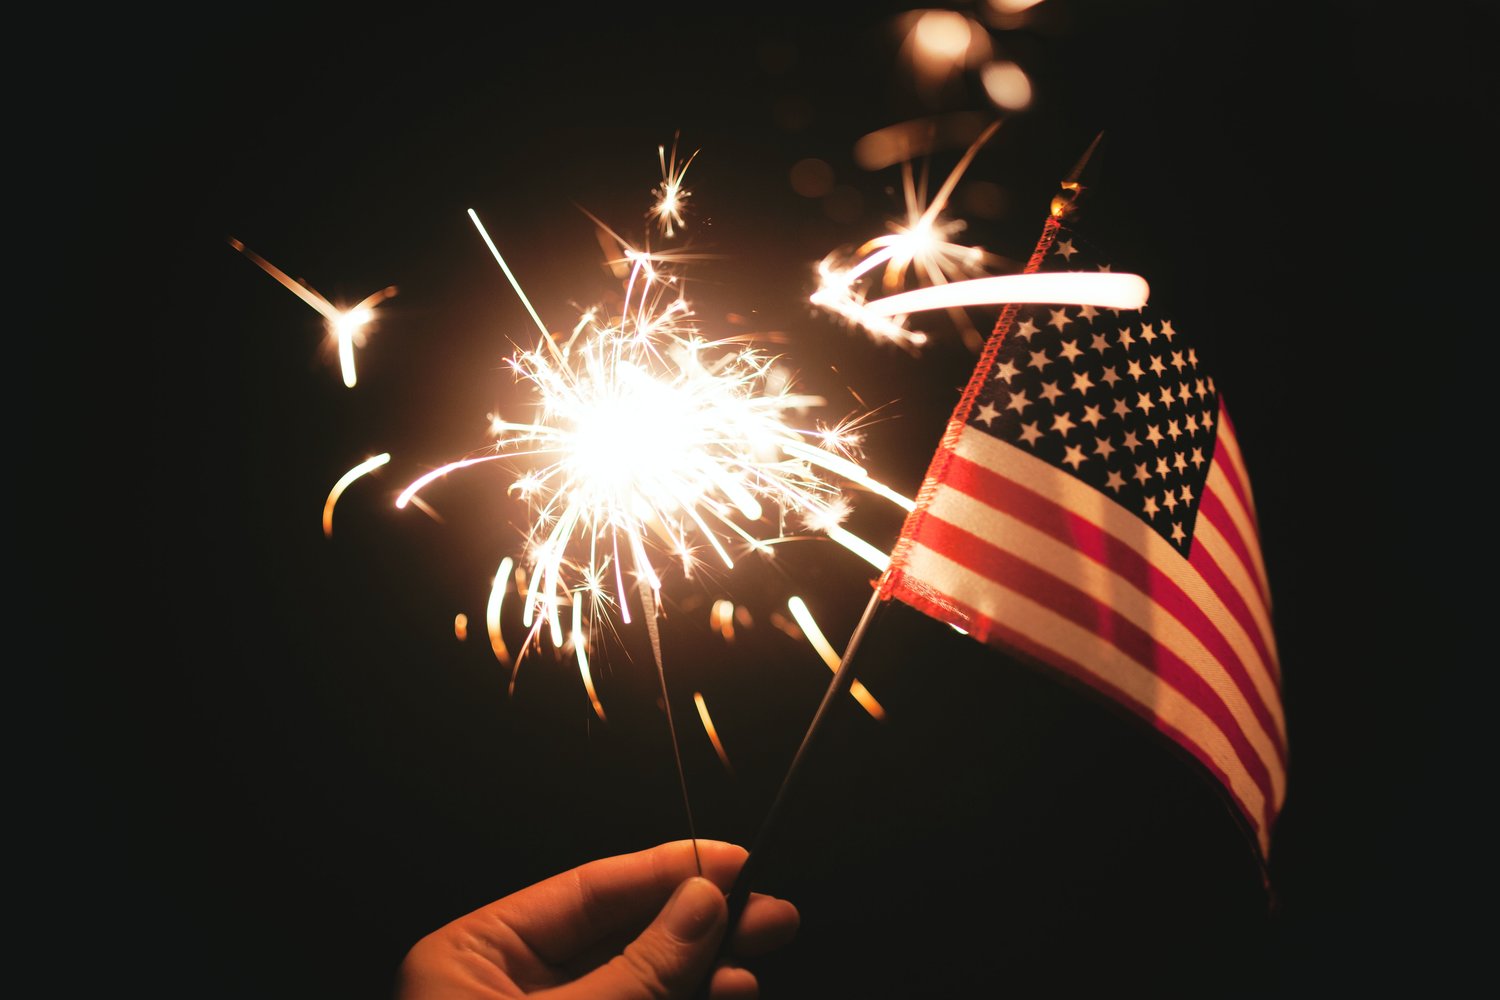 Fayetteville, Hope Mills and Fort Bragg will celebrate July 4th with family fun, music and fireworks.